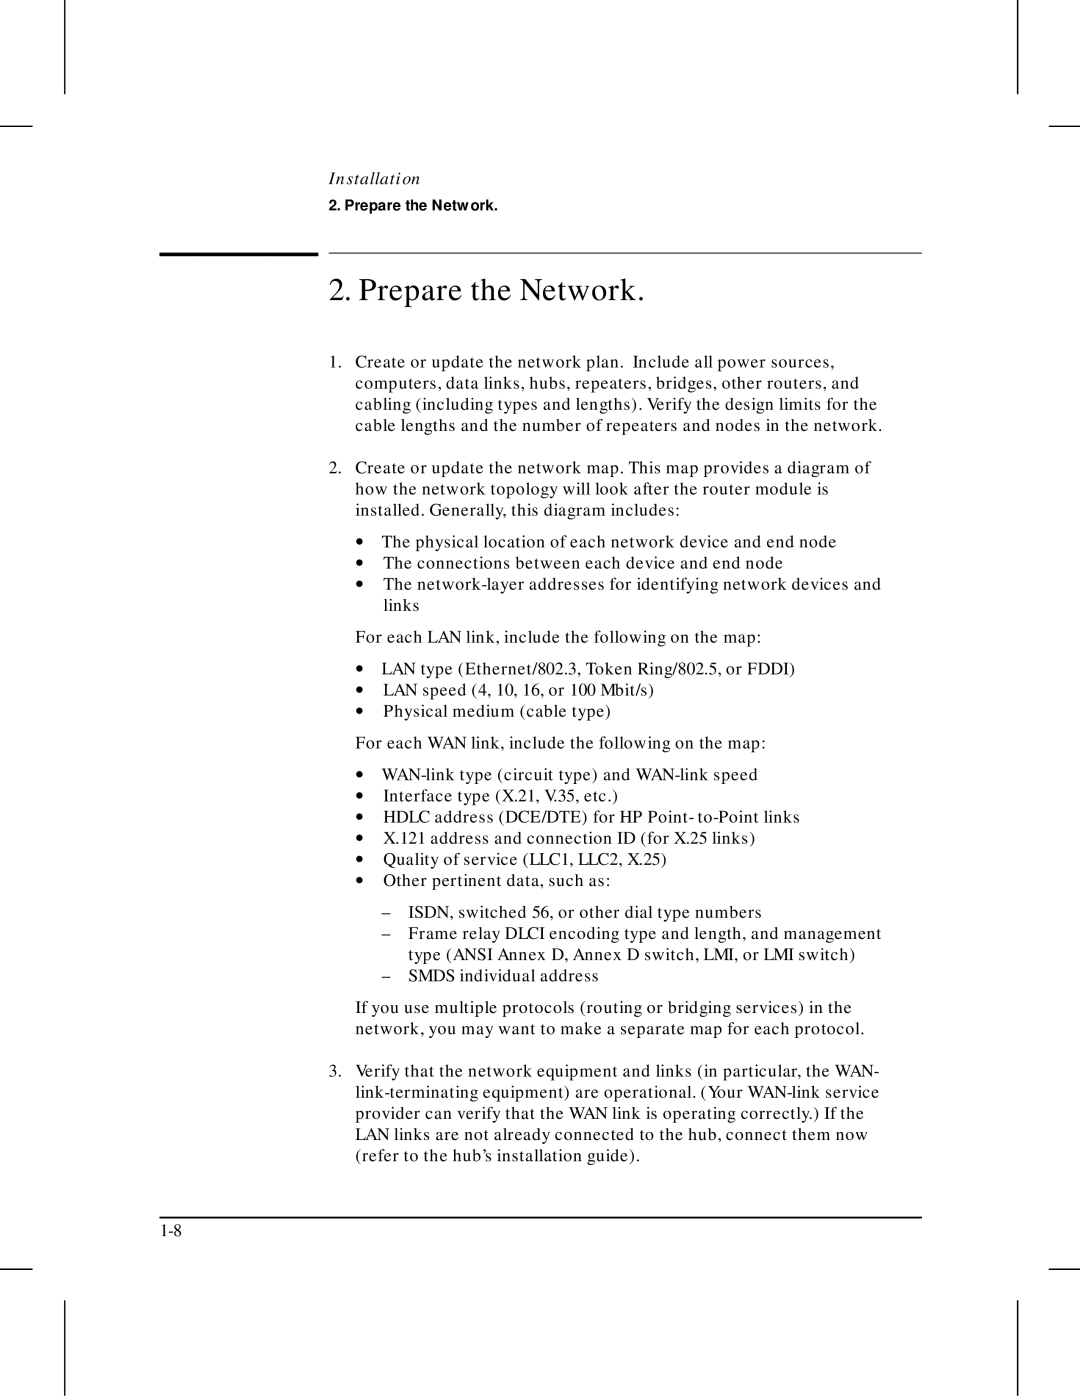 HP 210 manual Prepare the Network, Smds individual address 